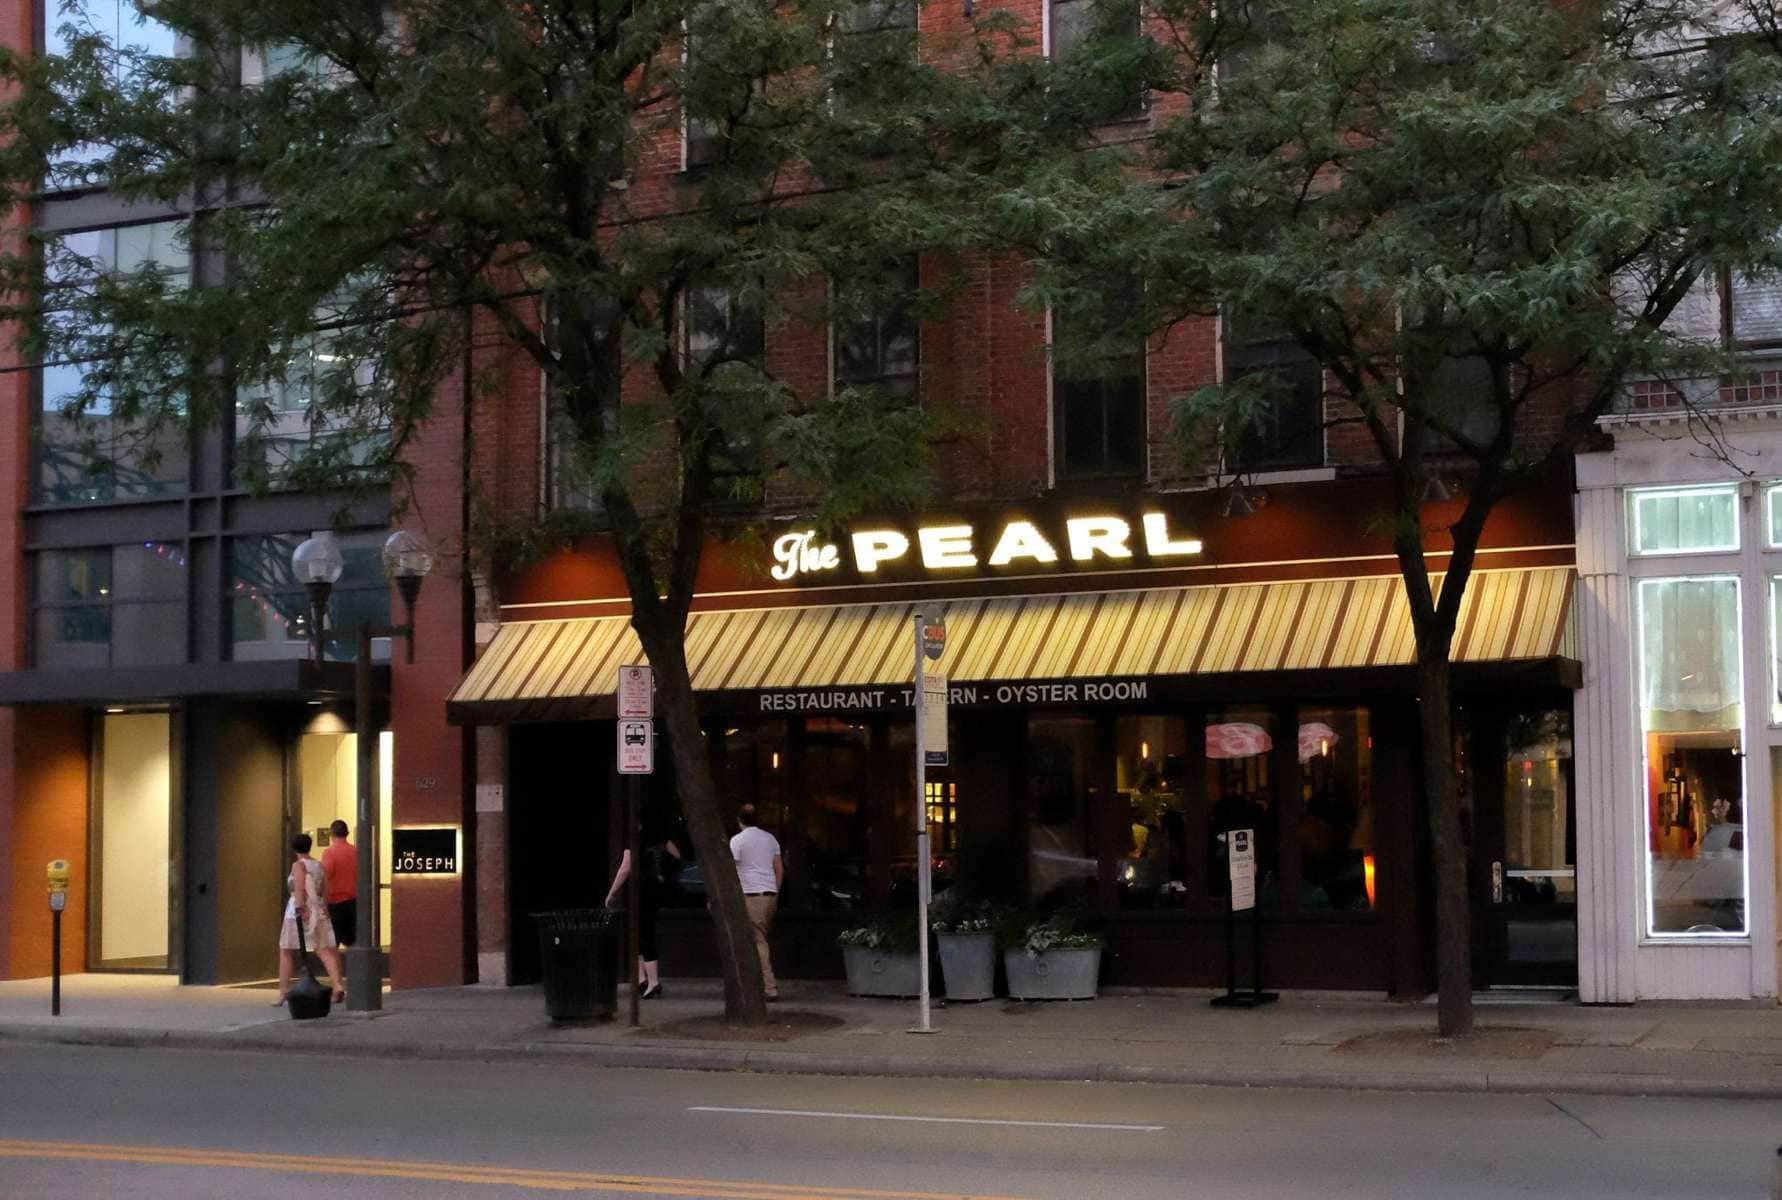 A review of The Pearl Restaurant in Columbus #lifeincbus